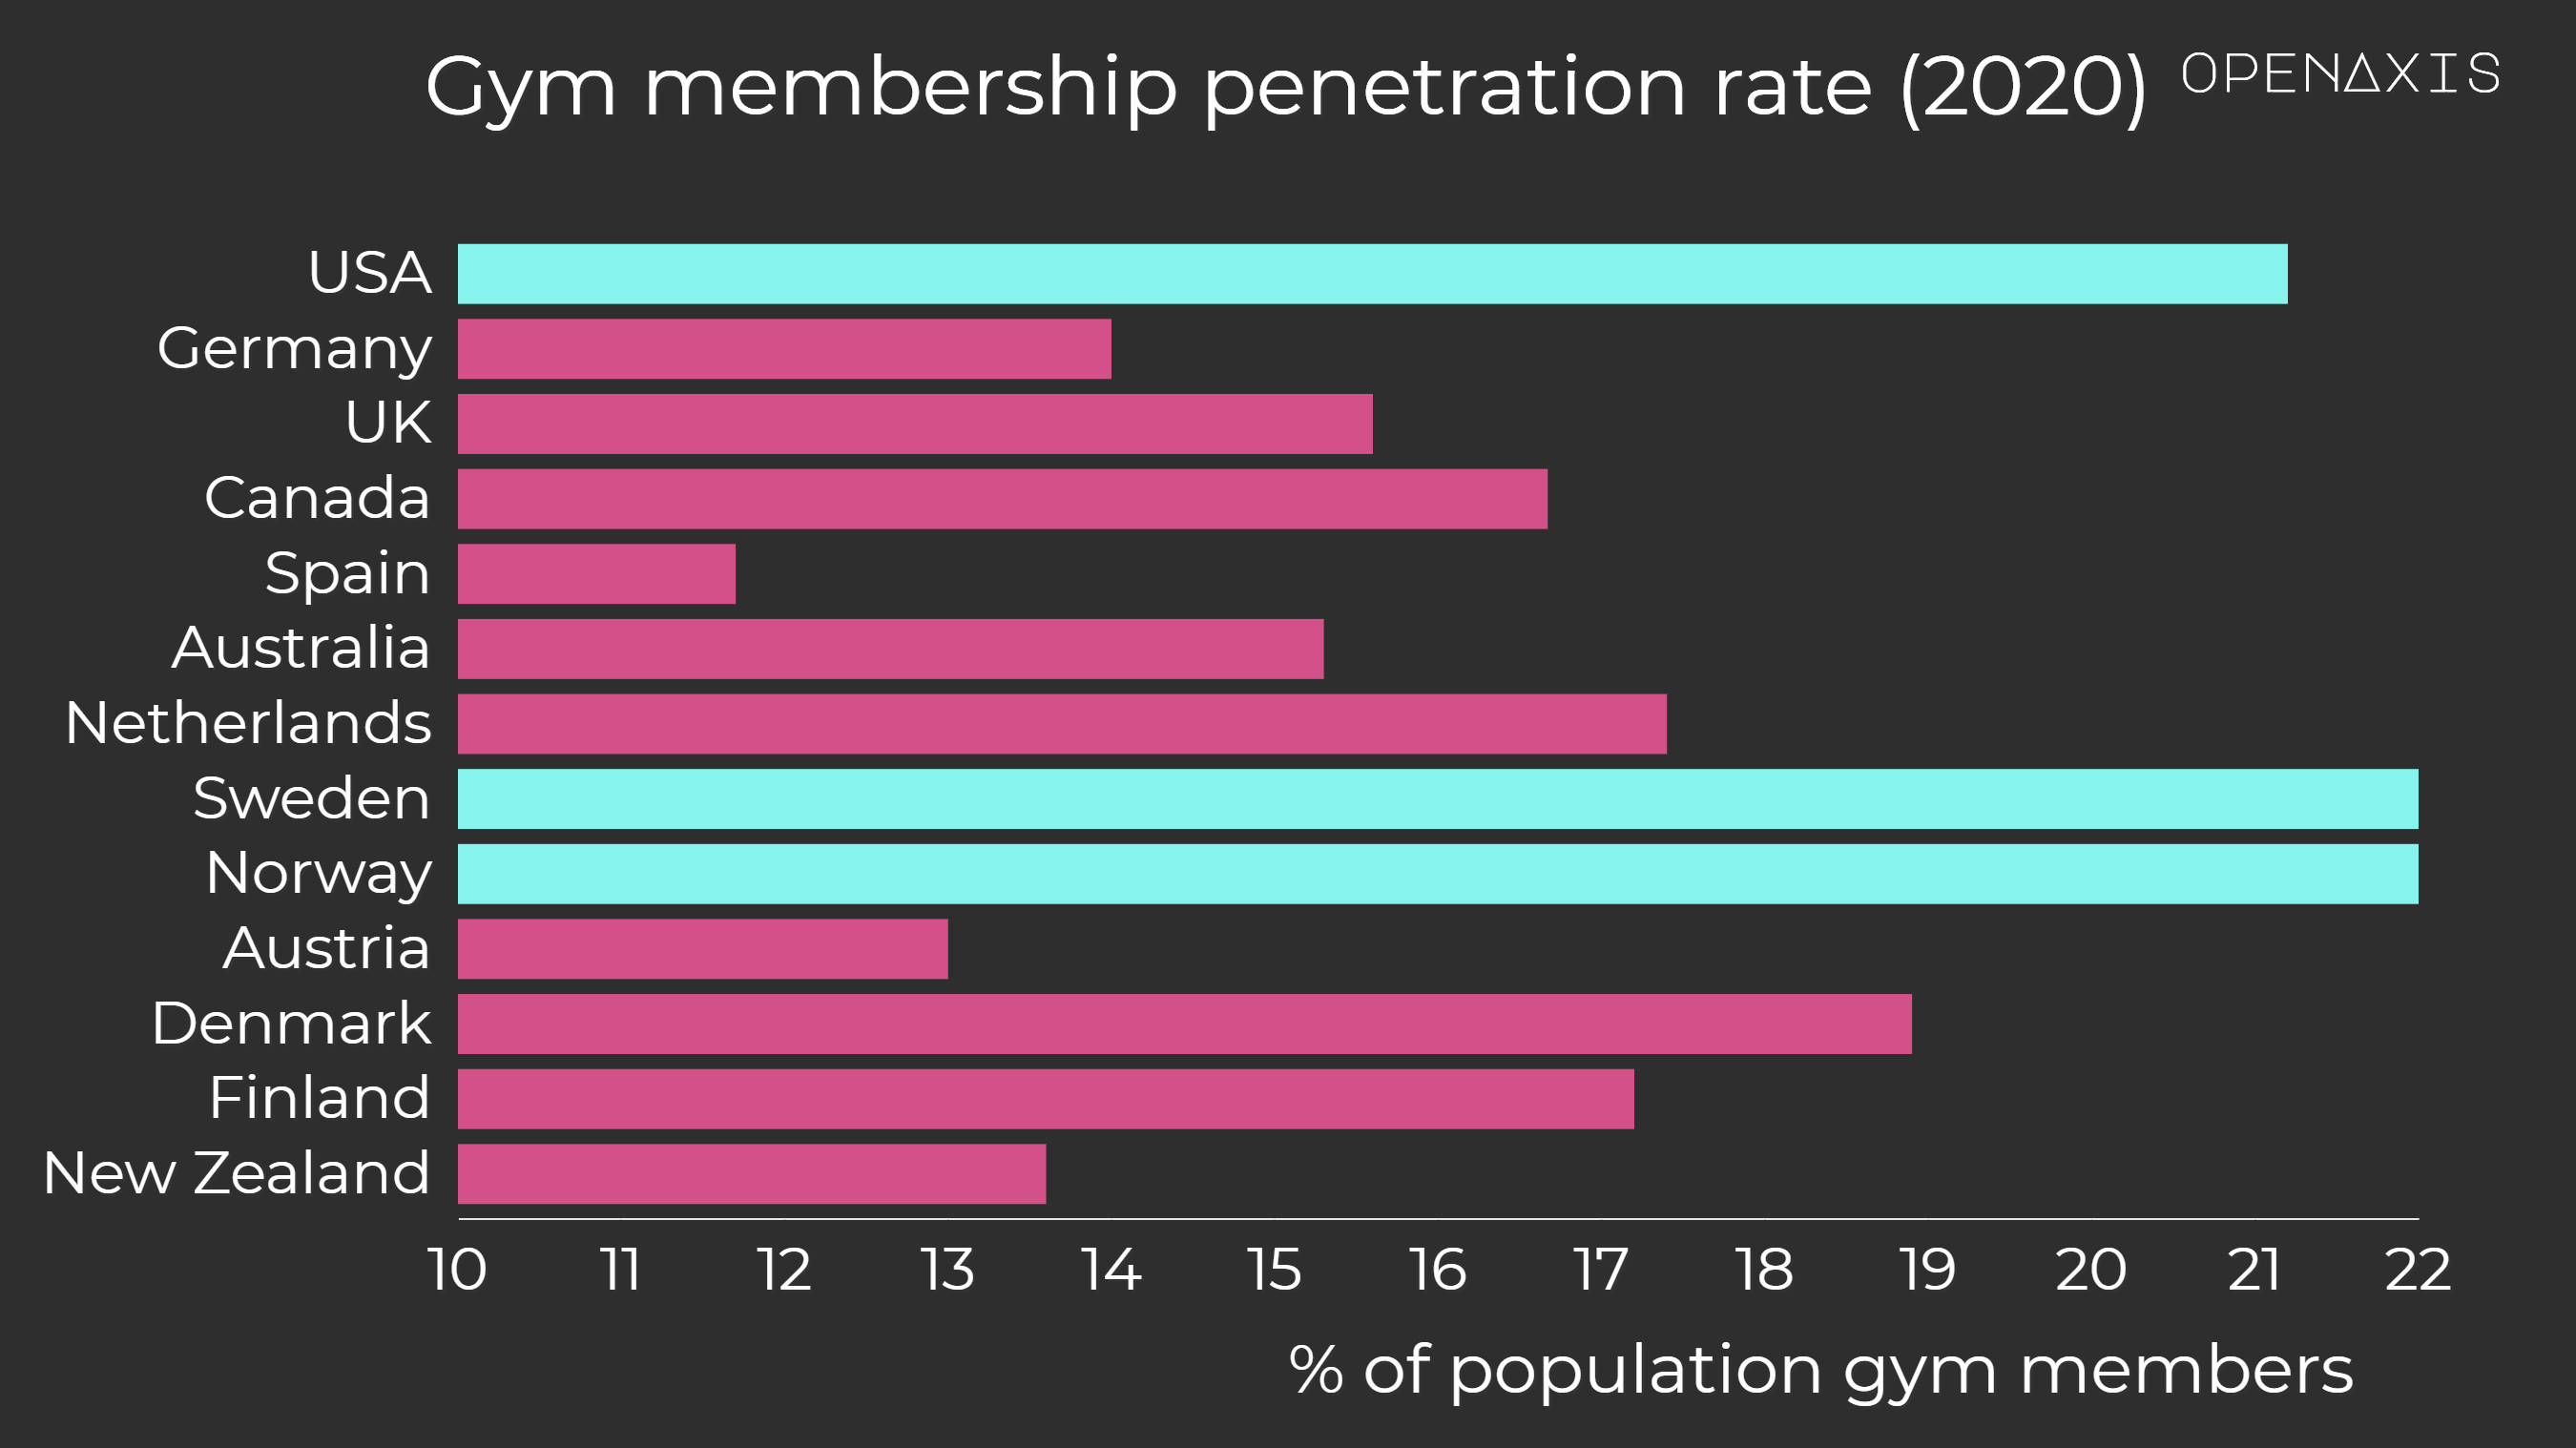 <p>Over 1 in 5 citizens in Norway, Sweden, and USA have gym memberships.</p><p><br /></p><p><span data-index="0" data-denotation-char data-id="0" data-value="&lt;a href=&quot;/search?q=%23fitness&quot; target=_self&gt;#fitness" data-link="/search?q=%23fitness">﻿<span contenteditable="false"><span></span><a href="/search?q=%23fitness" target="_self">#fitness</a></span>﻿</span> <span data-index="0" data-denotation-char data-id="0" data-value="&lt;a href=&quot;/search?q=%23health&quot; target=_self&gt;#health" data-link="/search?q=%23health">﻿<span contenteditable="false"><span></span><a href="/search?q=%23health" target="_self">#health</a></span>﻿</span> <span data-index="0" data-denotation-char data-id="0" data-value="&lt;a href=&quot;/search?q=%23gym&quot; target=_self&gt;#gym" data-link="/search?q=%23gym">﻿<span contenteditable="false"><span></span><a href="/search?q=%23gym" target="_self">#gym</a></span>﻿</span> </p><p><br /></p><p>Source: <a href="/data/3702" target="_blank">RunRepeat</a></p>